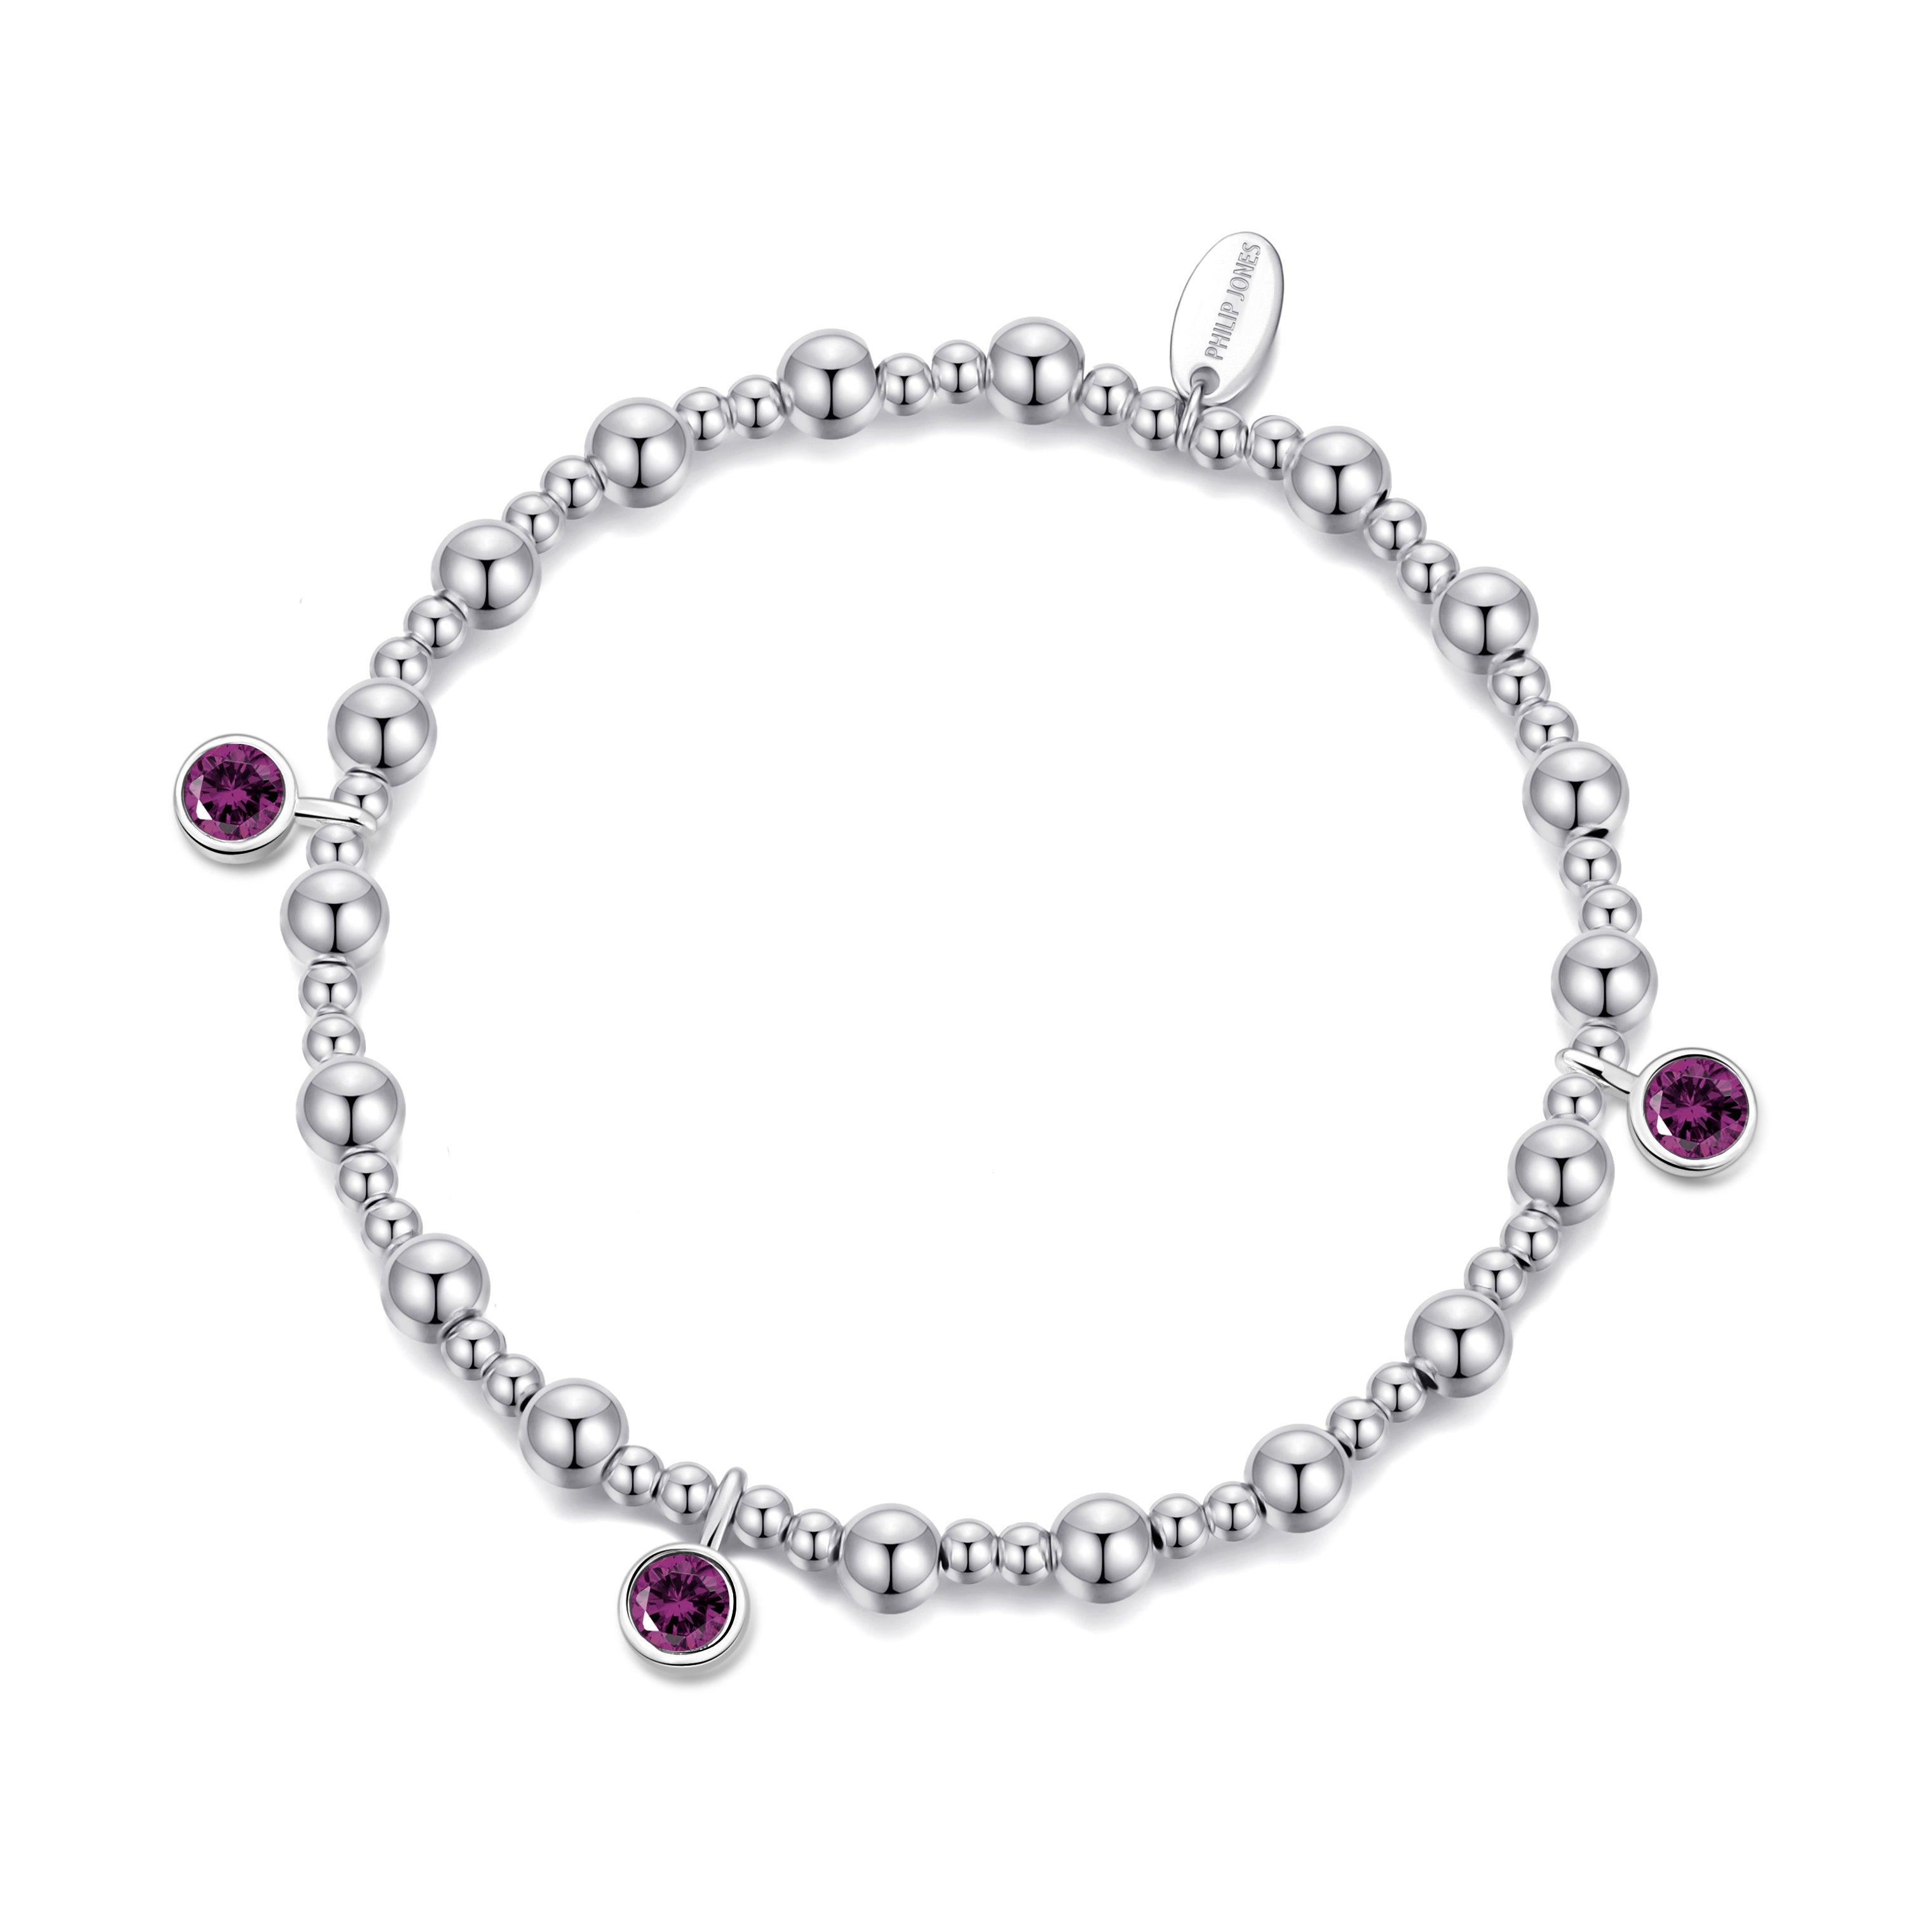 June (Alexandrite) Birthstone Stretch Charm Bracelet with Quote Gift Box